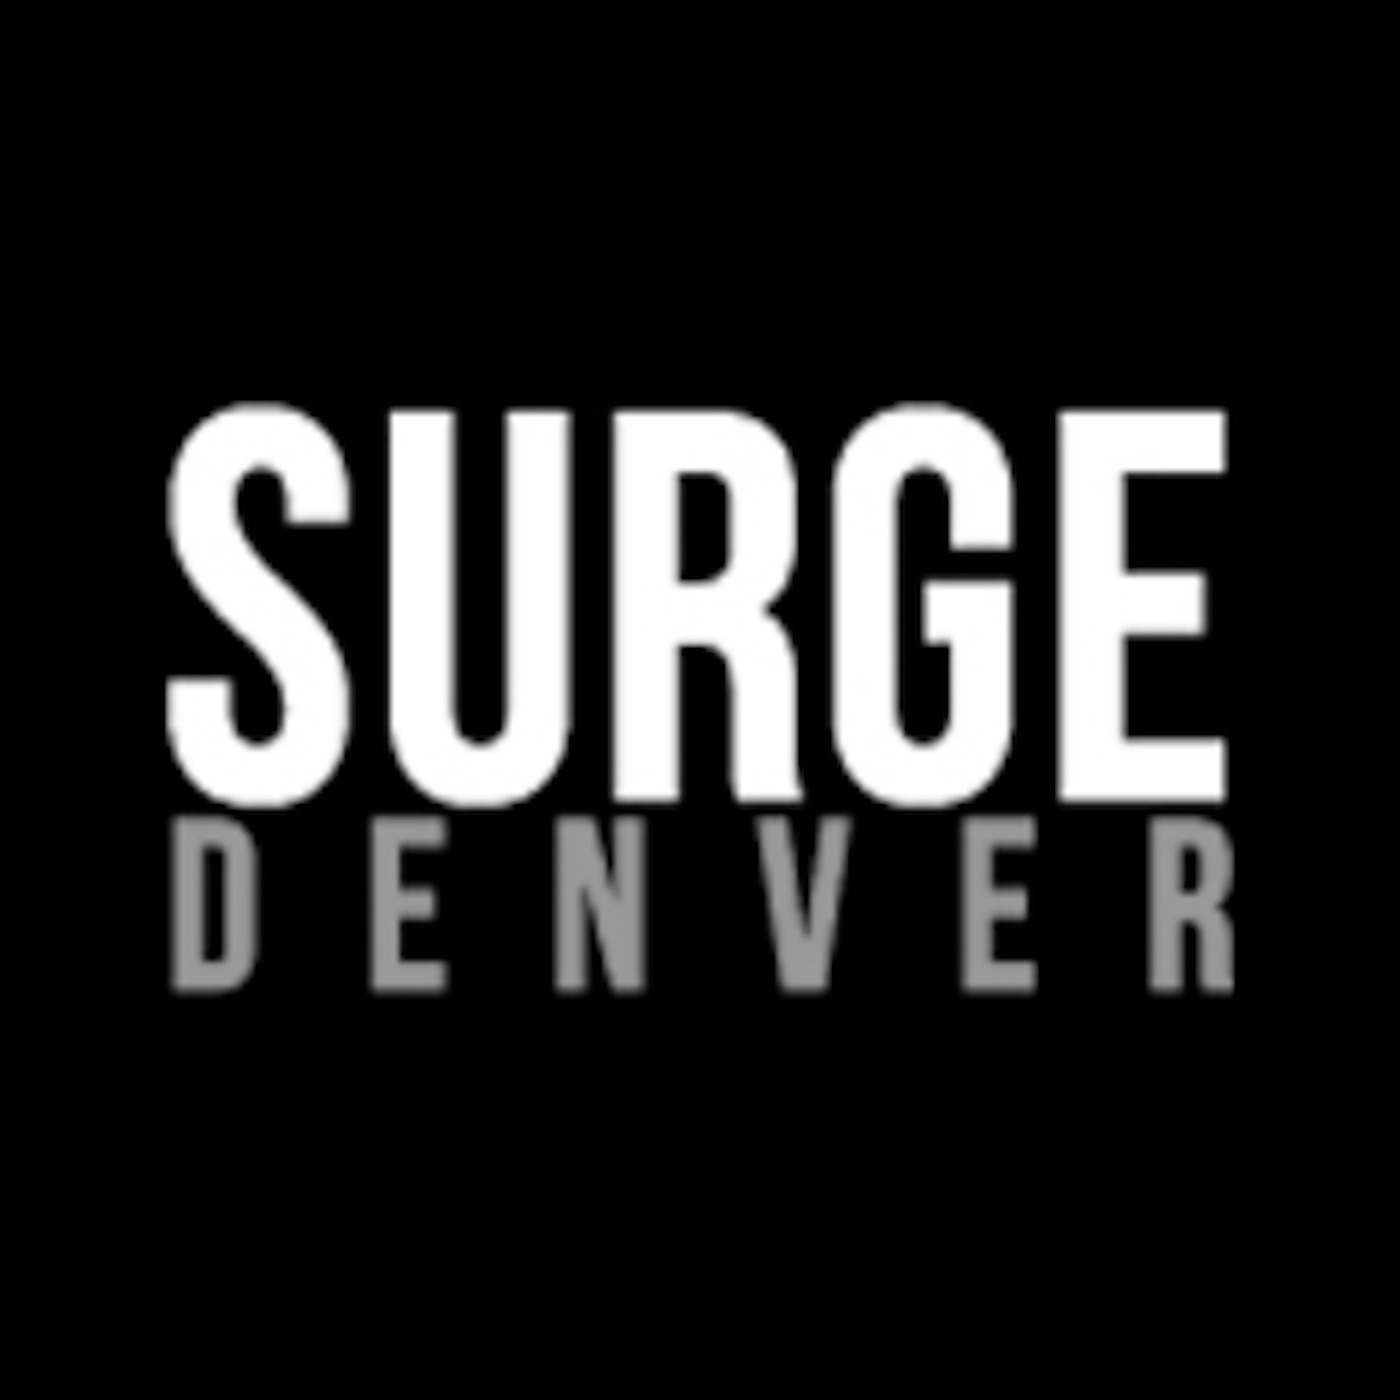 Surge Intensive #1 2016 - Missionary Encounter with the Western Story